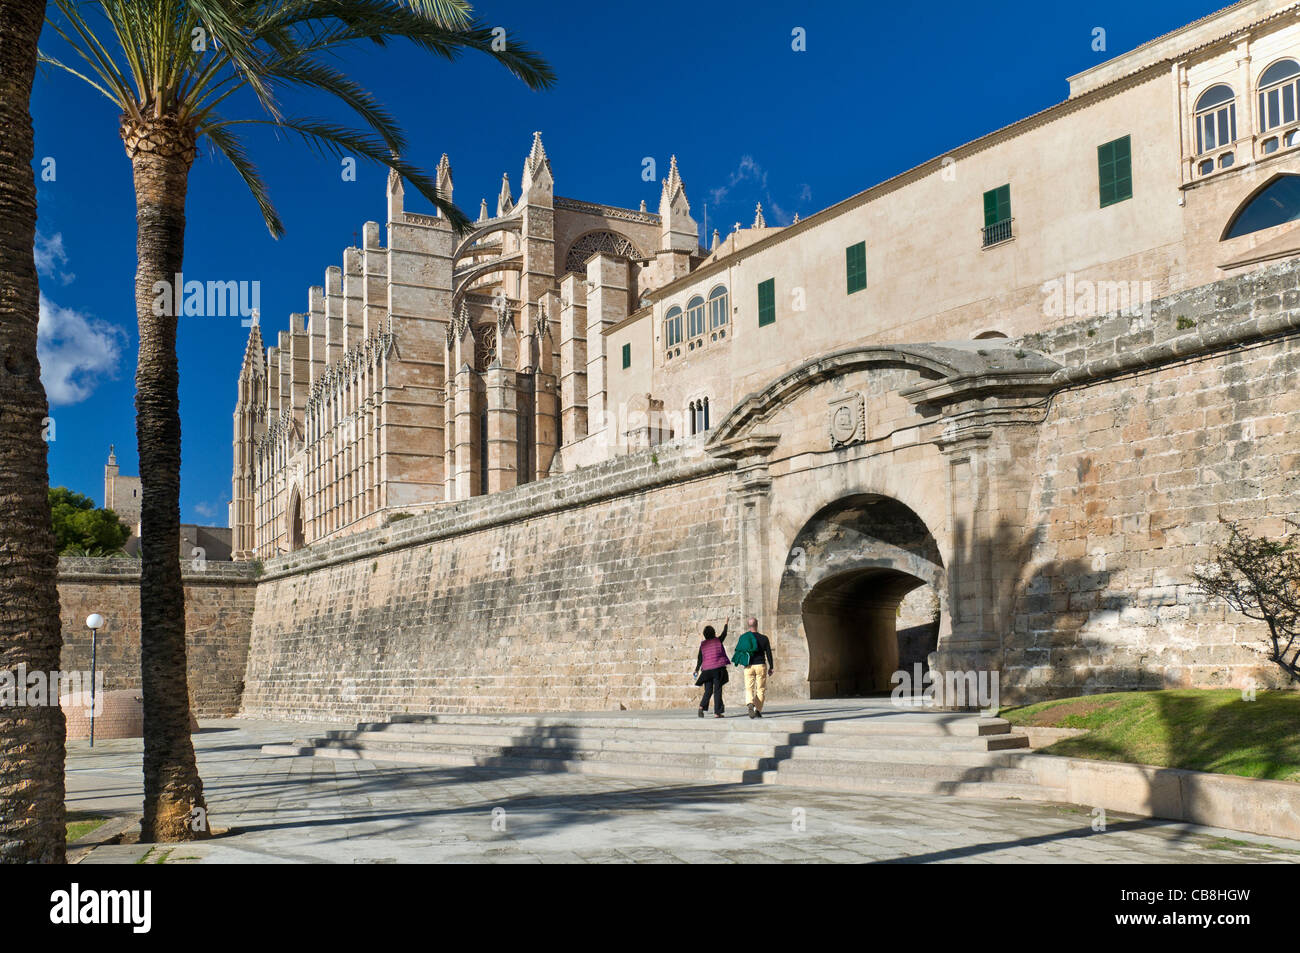 Palma Cathedral and historic Parc de la Mar with tourist couple standing looking at old stone entrance Mallorca Balearics Spain Stock Photo